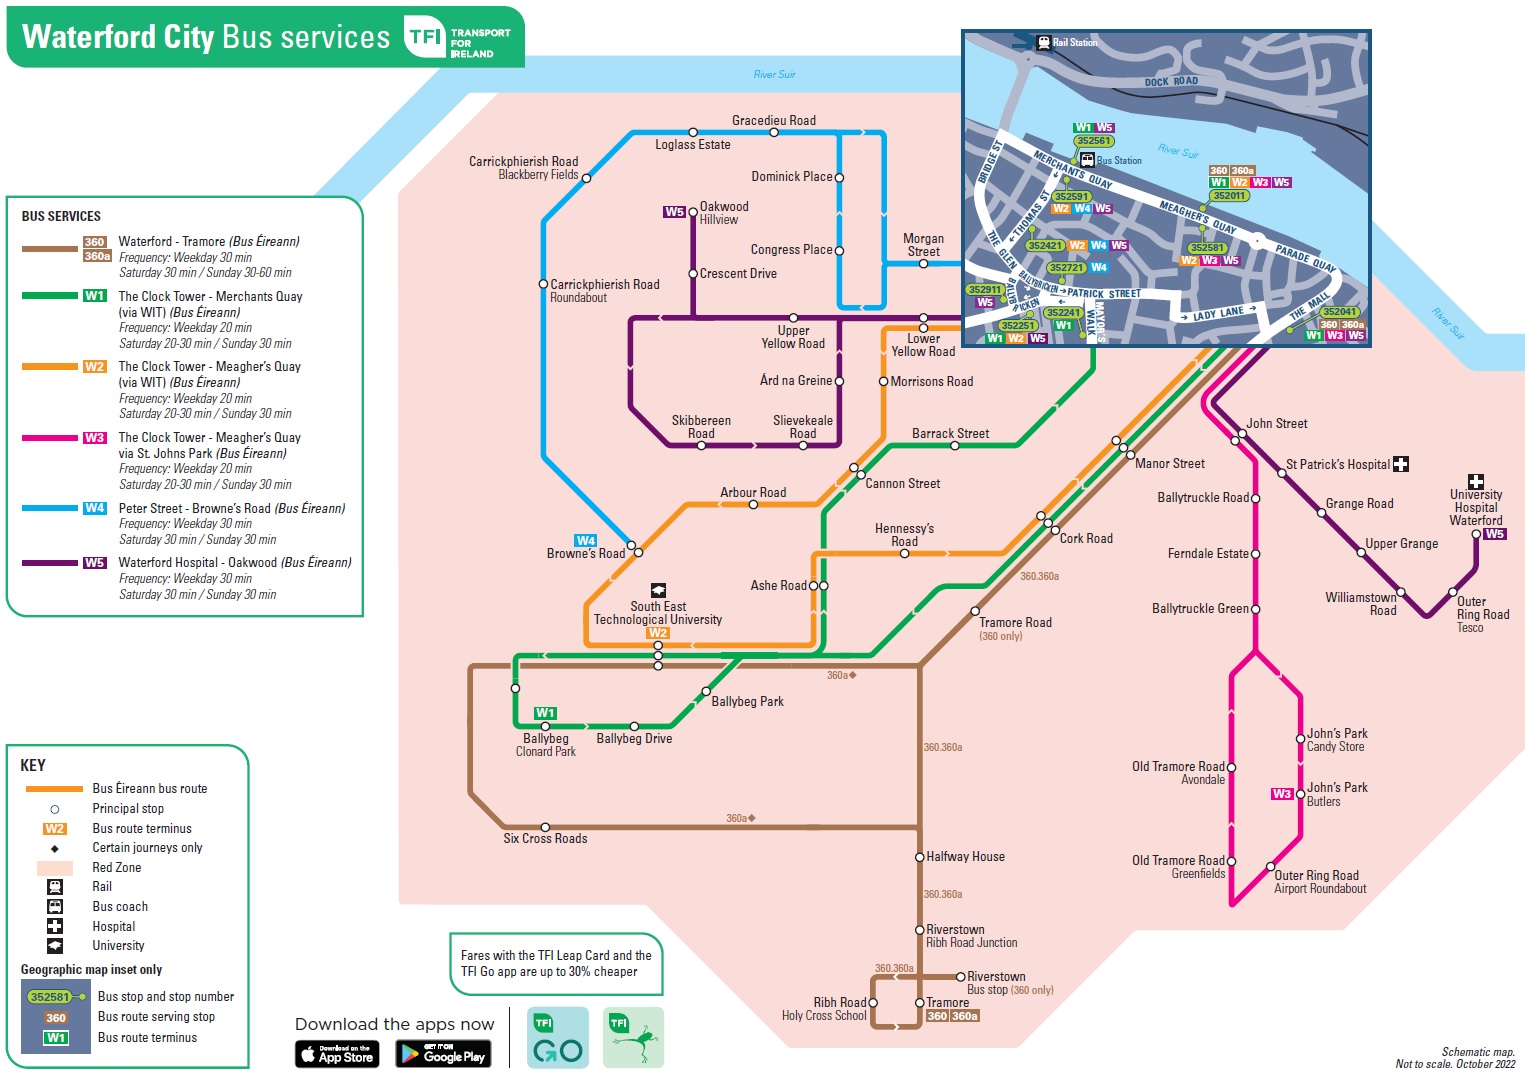 Waterford City Bus Network Maps | Transport for Ireland